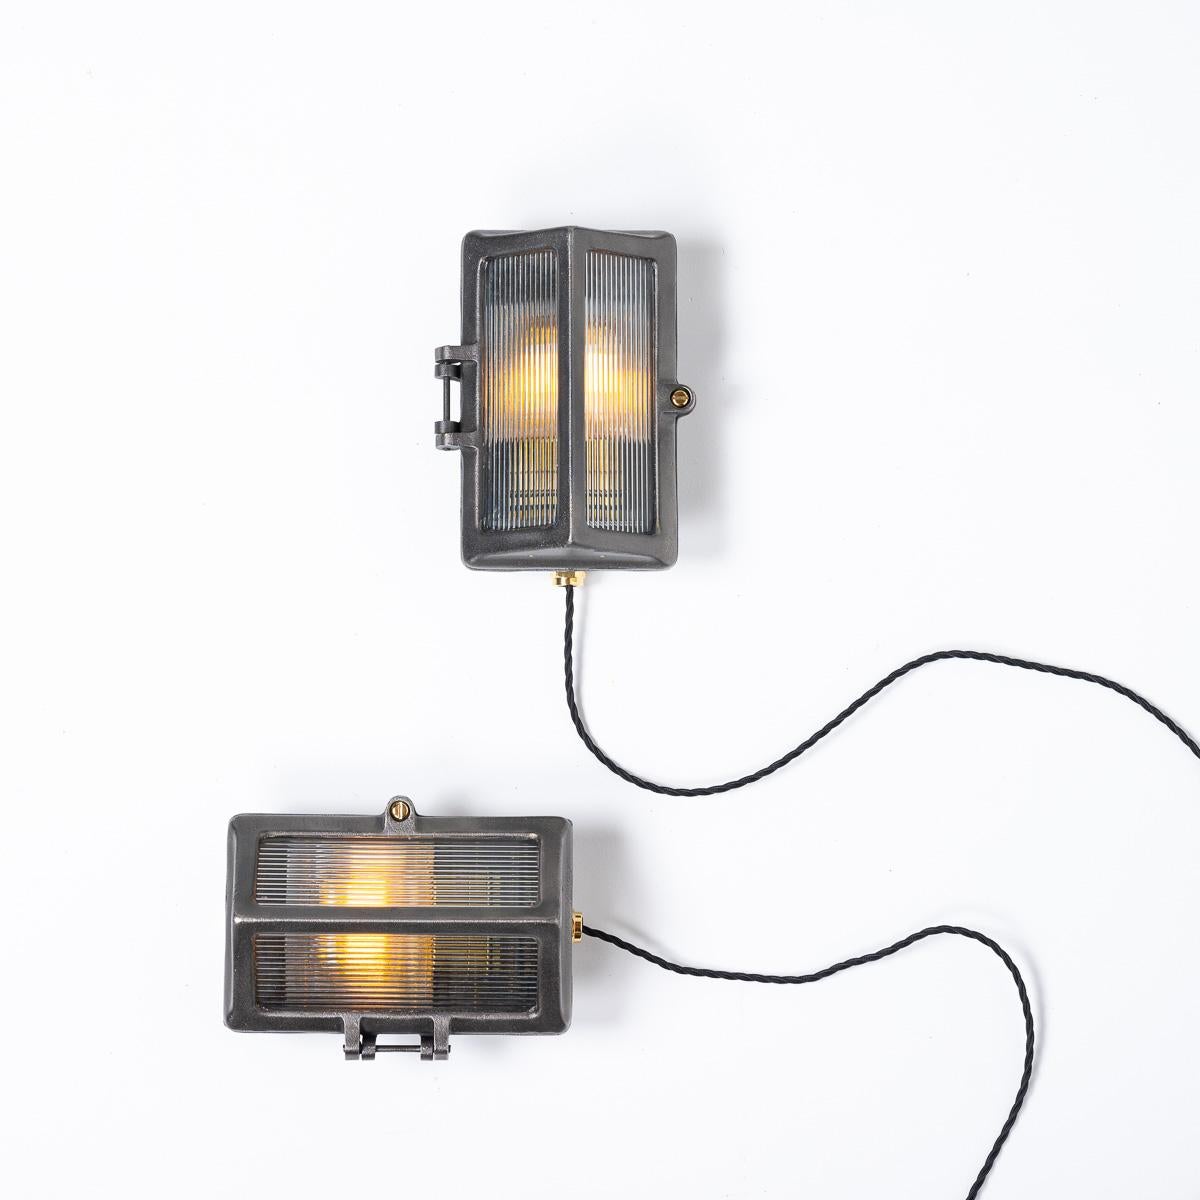 RECLAIMED  INDUSTRIAL BULKHEAD LIGHT FITTINGS WITH REEDED GLASS

Featured in the Everything Electrical Catalog by maker The General Electric Co Ltd.

Model number F64018 produced between 1940 and 1960.

Two angled heavy reeded glass windows offer a